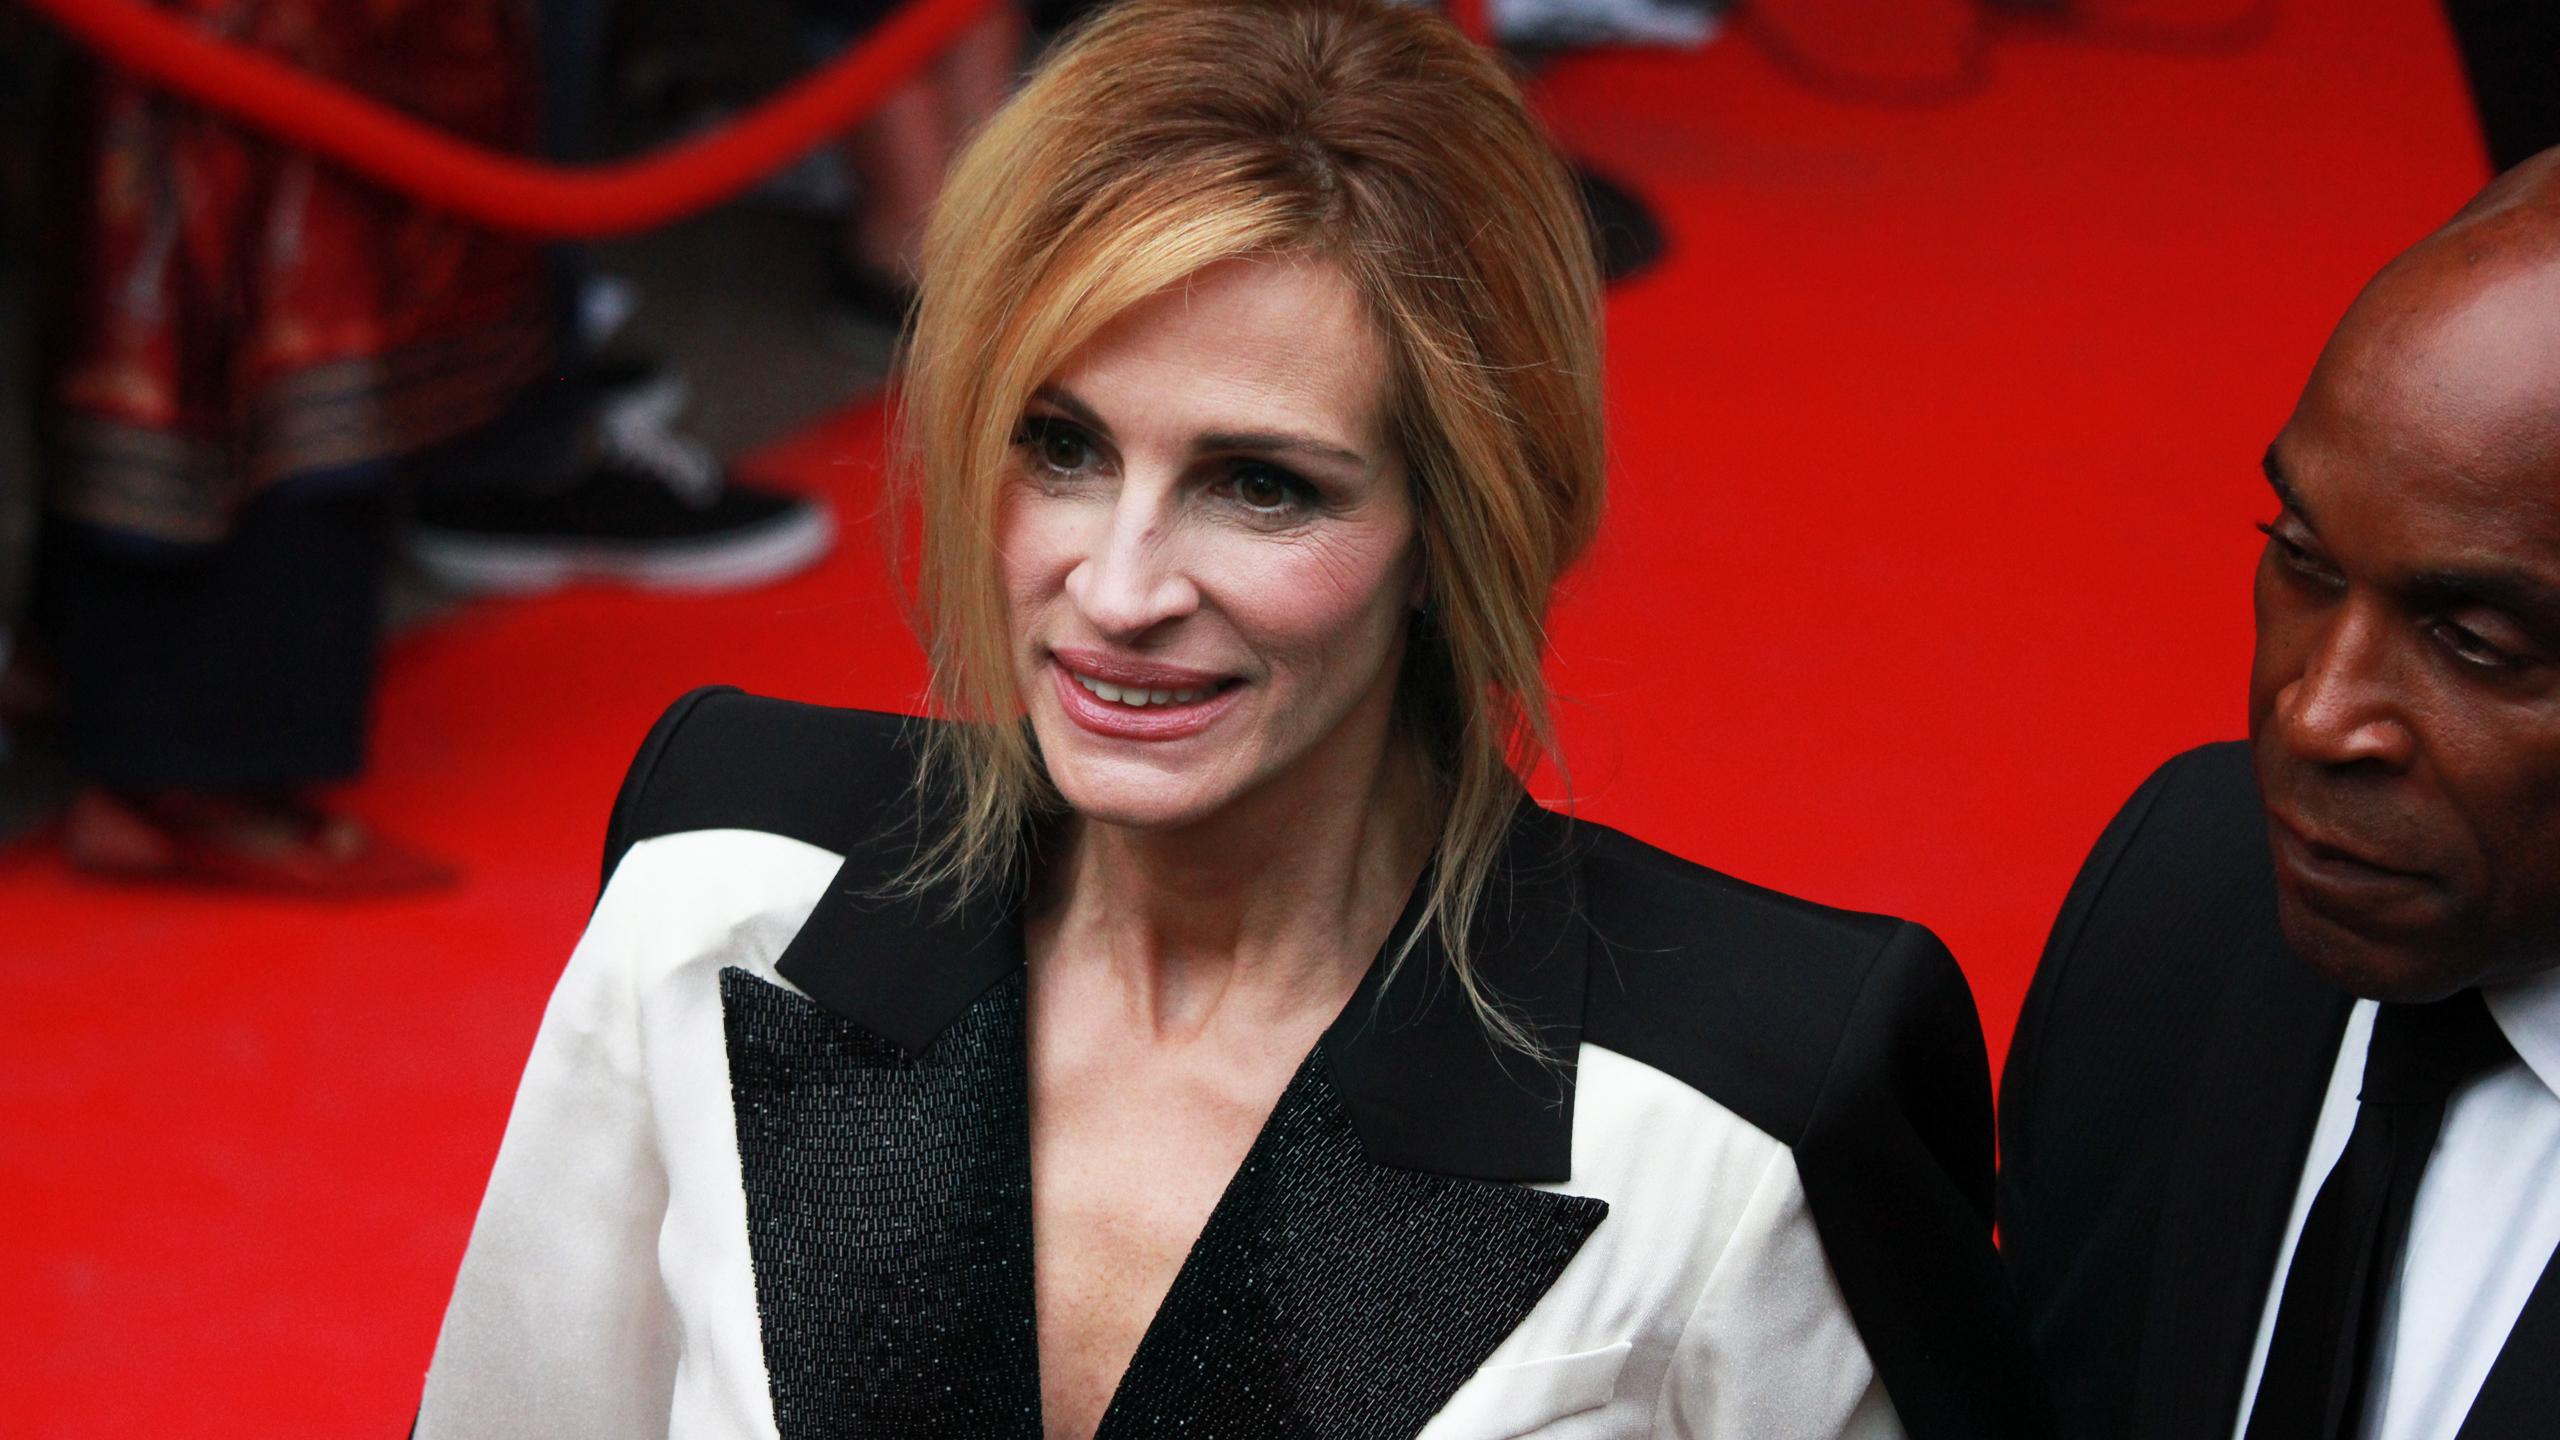 Julia Roberts smiles on red carpet at movie premiere